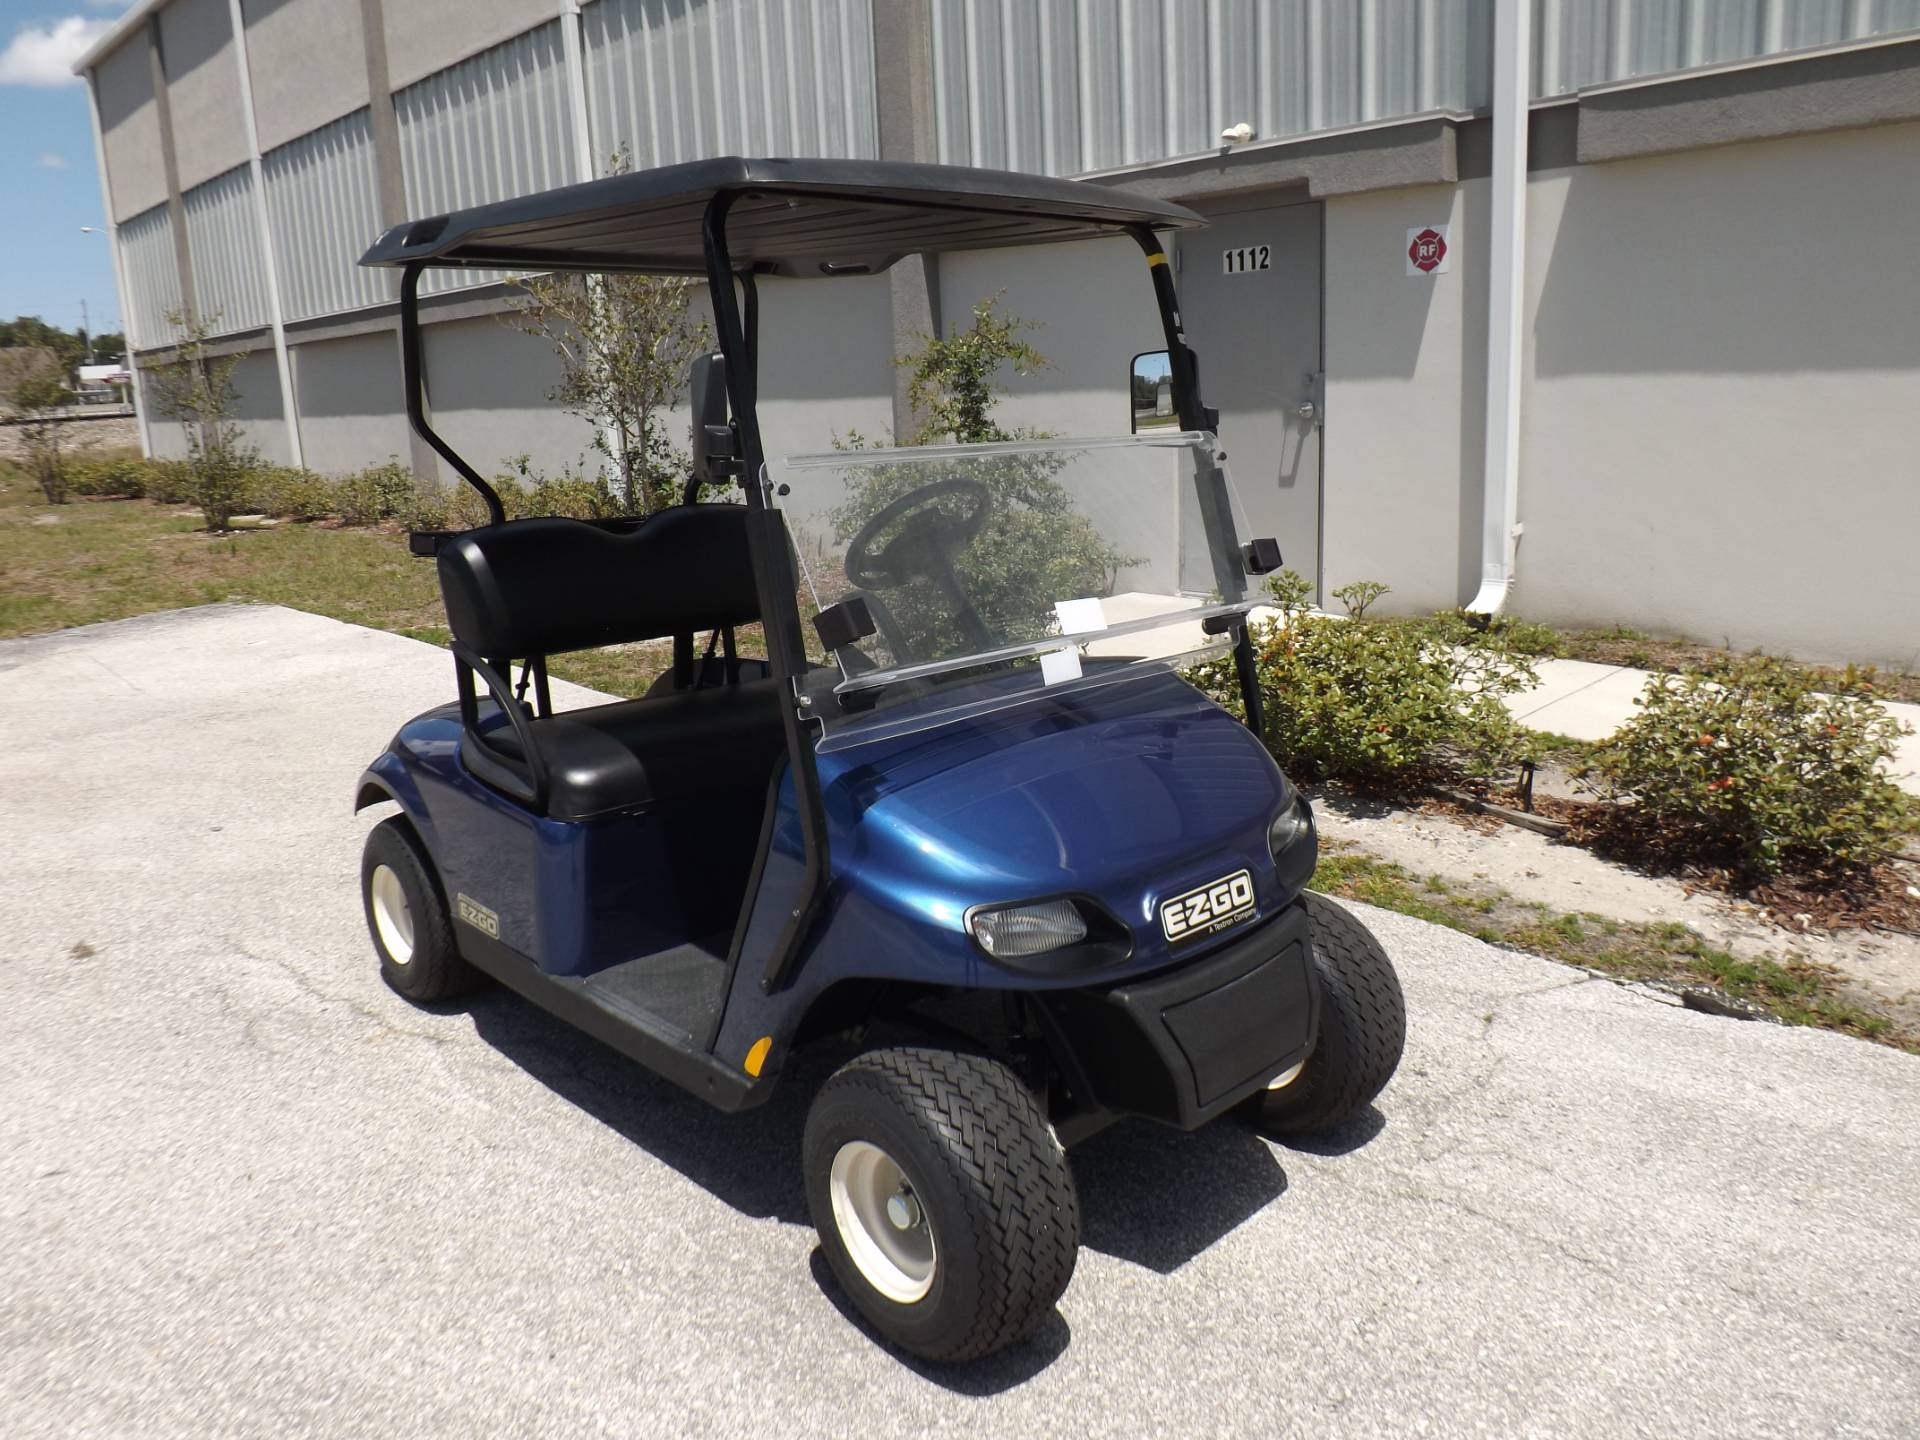 Re-paste effective adjective Used 2018 E-Z-GO Freedom TXT (PTV) Electric Golf Carts in Lakeland, FL |  Stock Number: JRTXT140